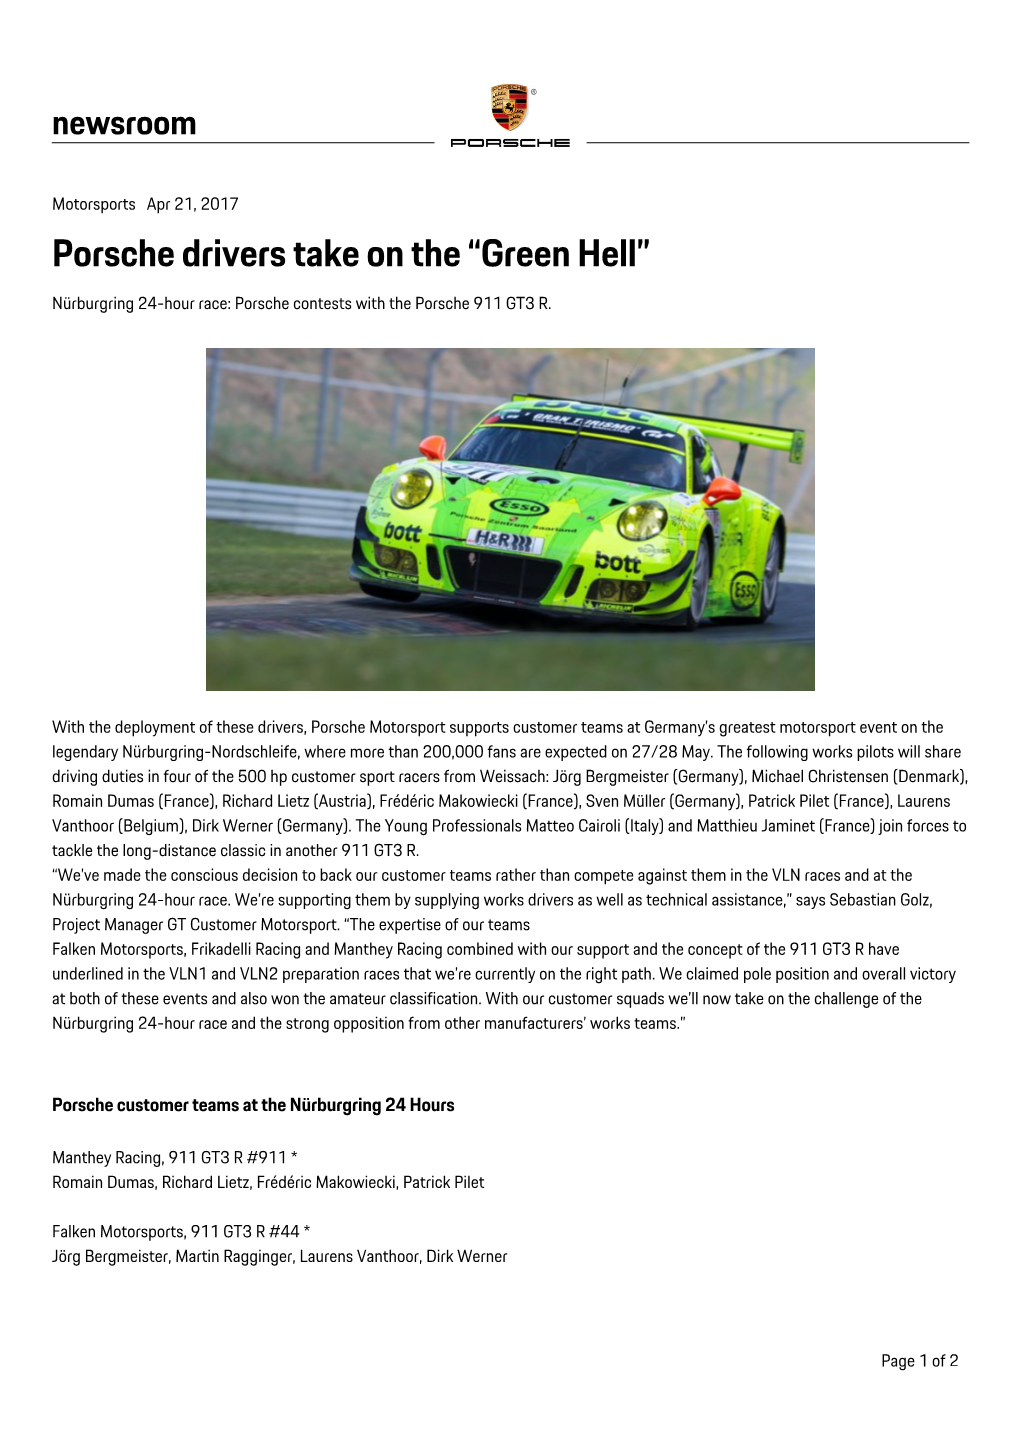 Porsche Drivers Take on the “Green Hell” Nürburgring 24-Hour Race: Porsche Contests with the Porsche 911 GT3 R